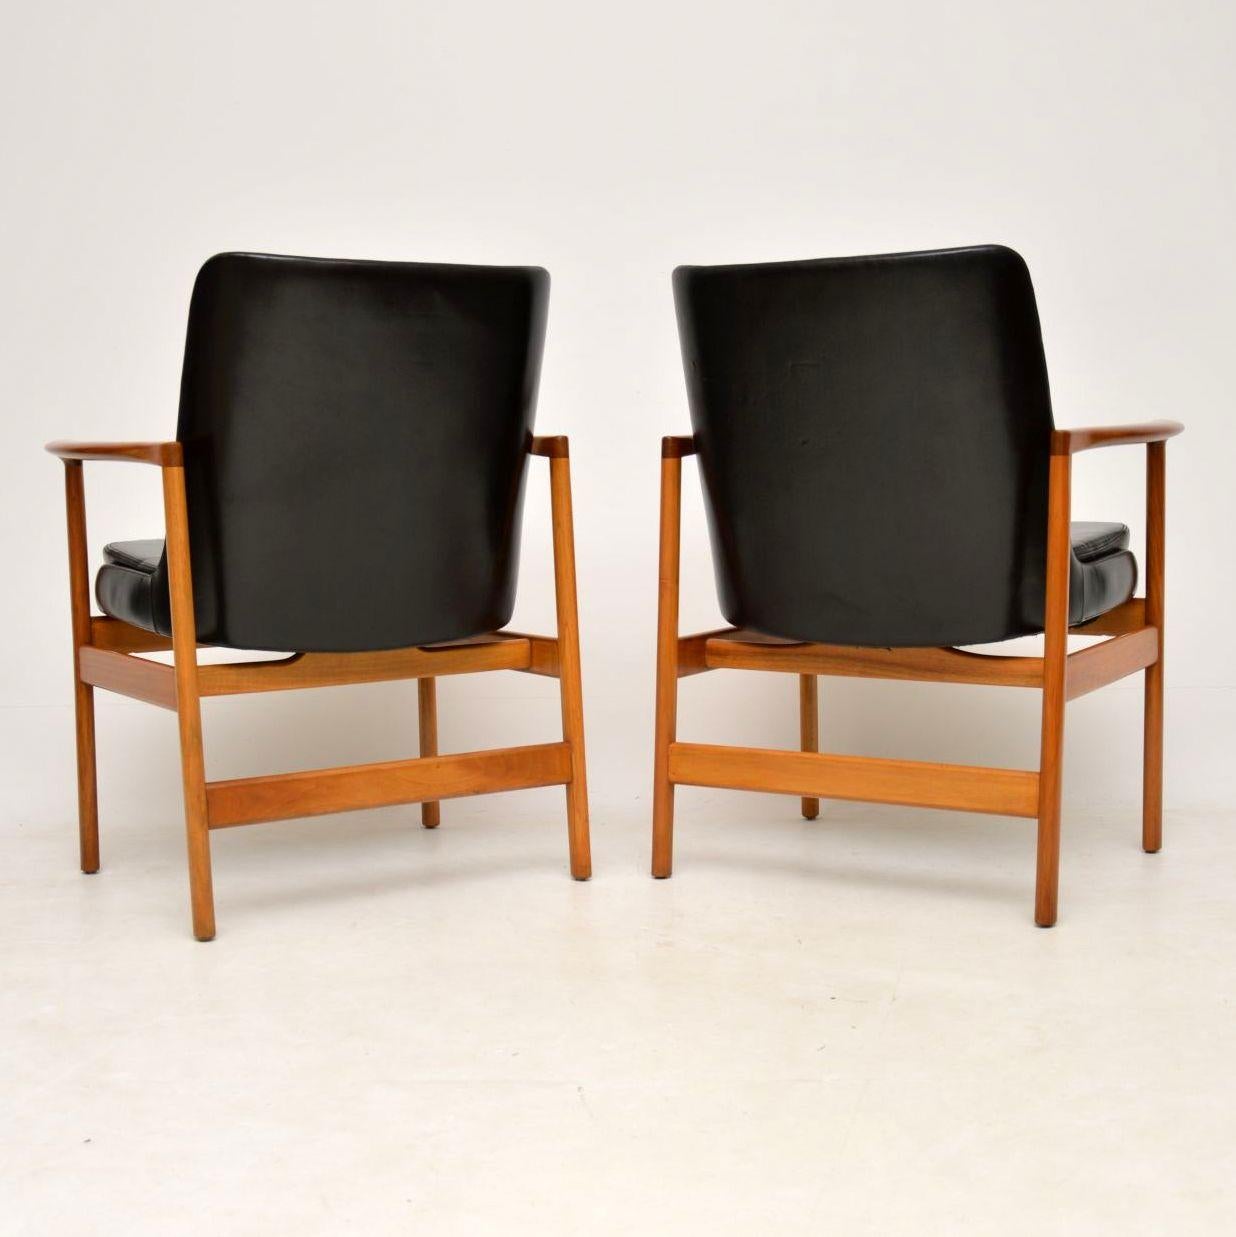 Mid-20th Century 1960s Pair of Leather and Walnut Armchairs by IB Kofod Larsen